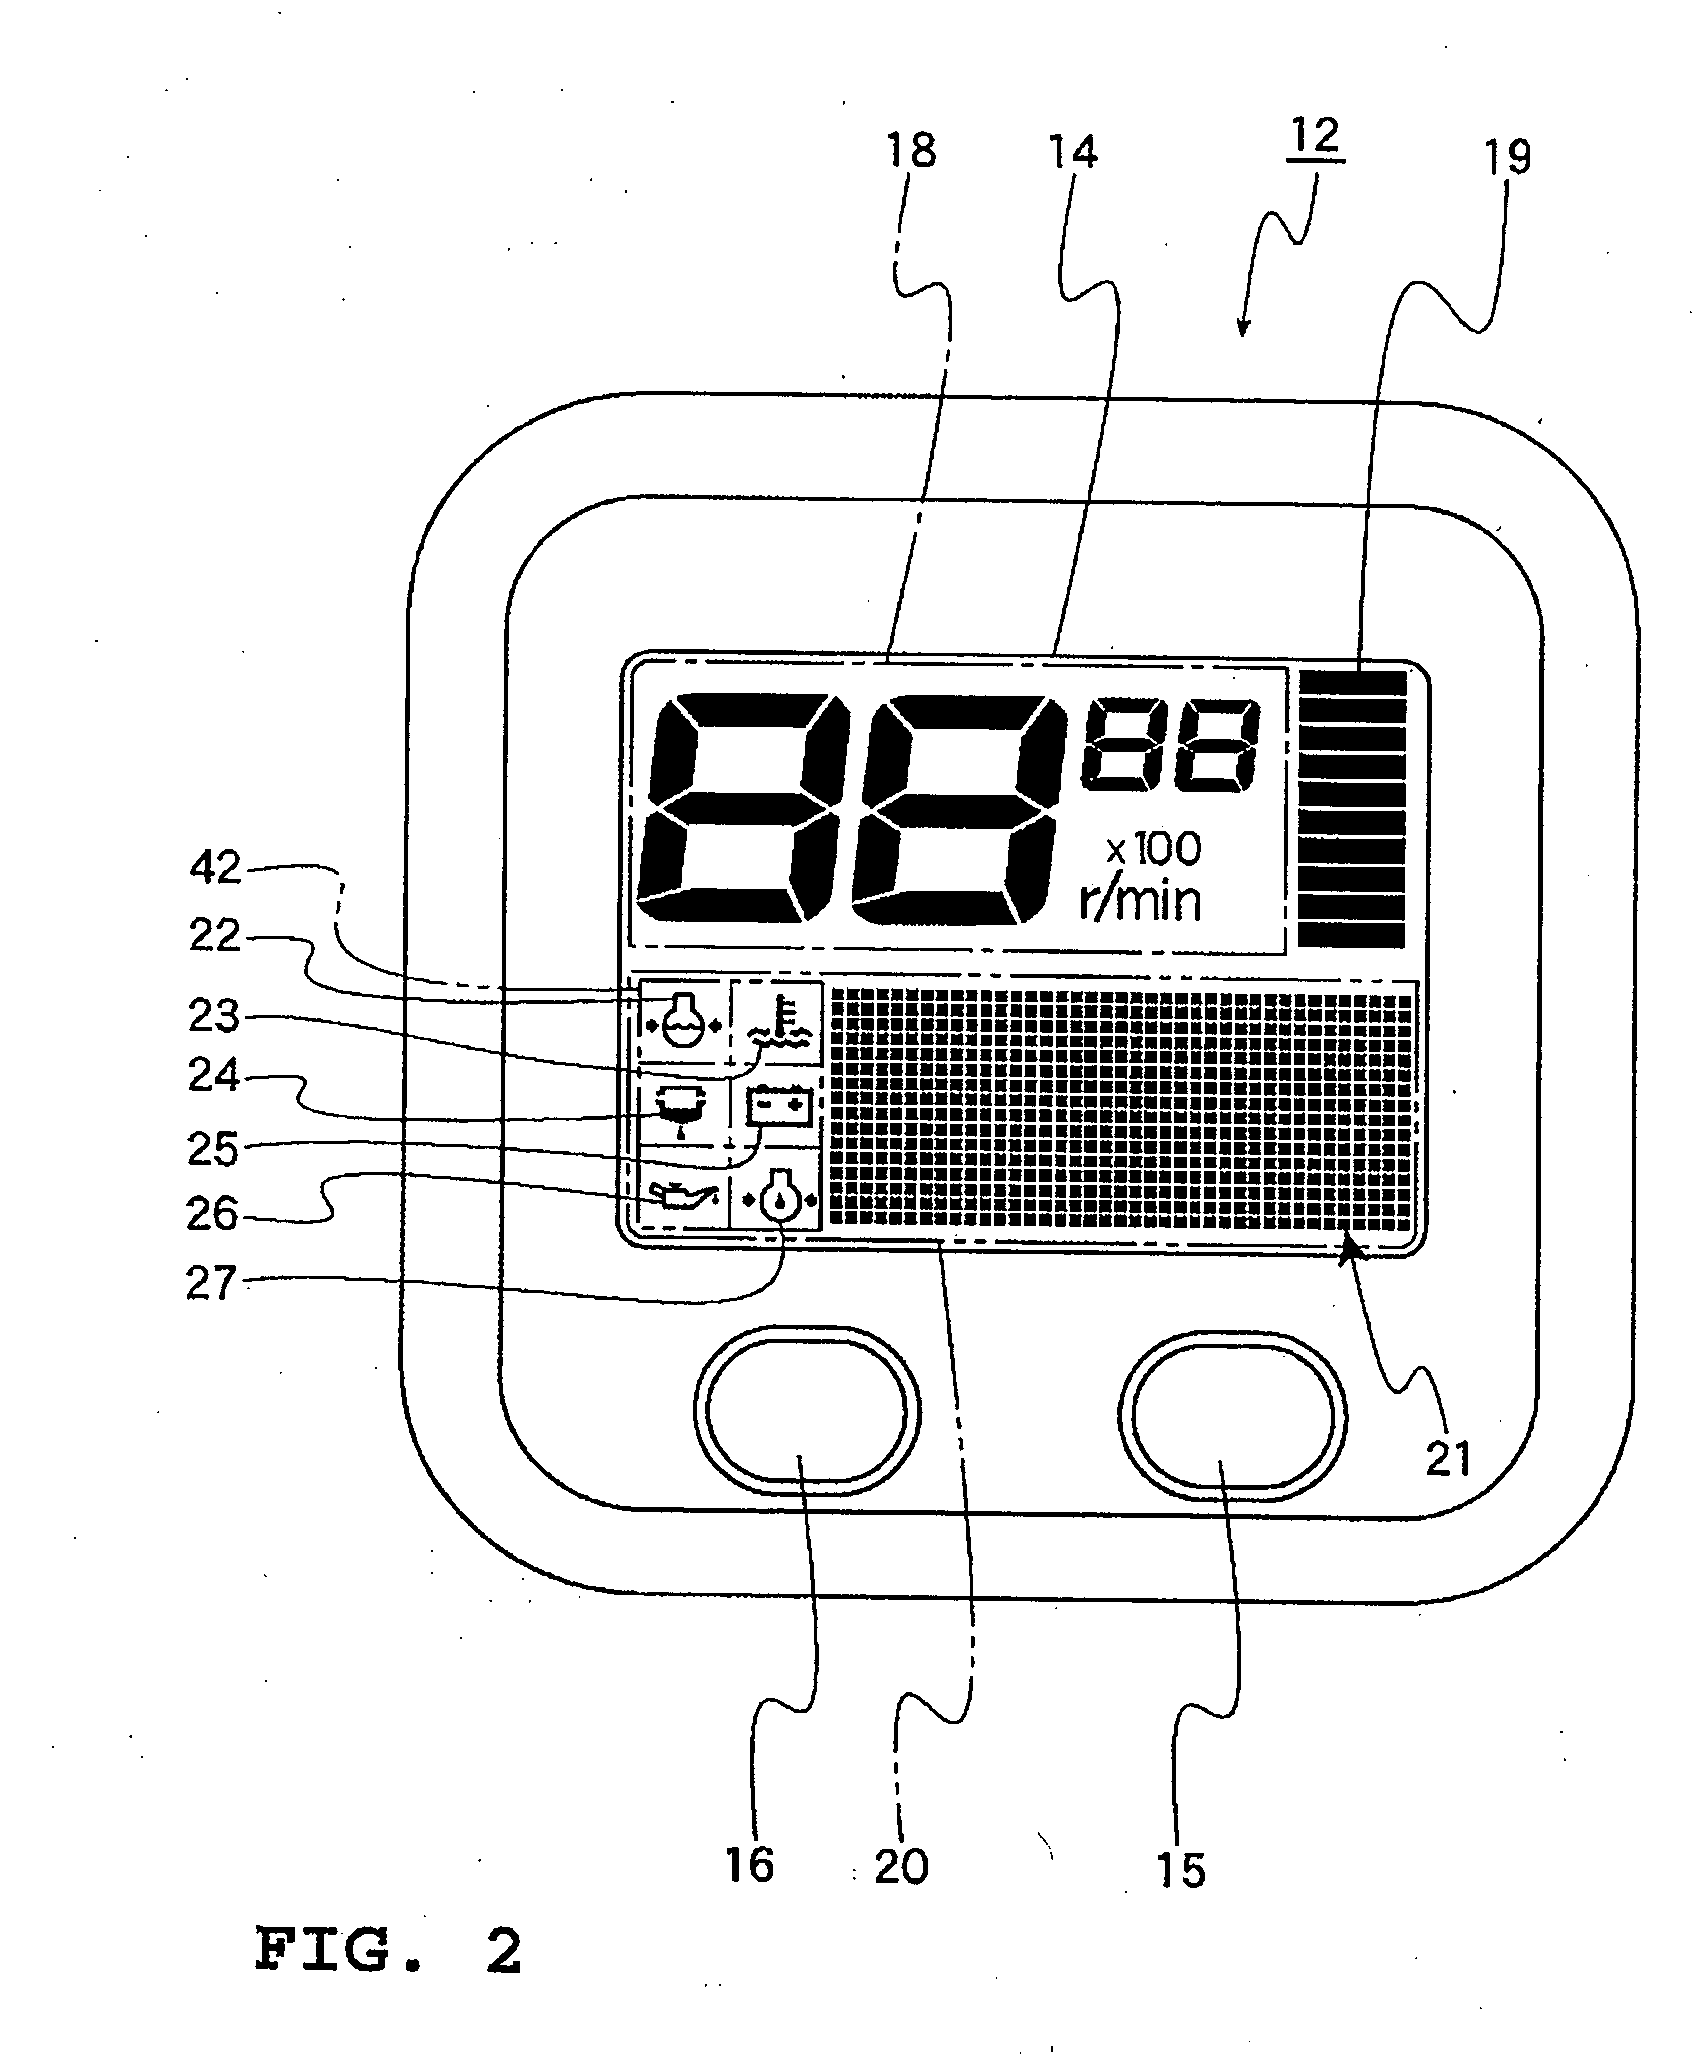 Display device for watercraft